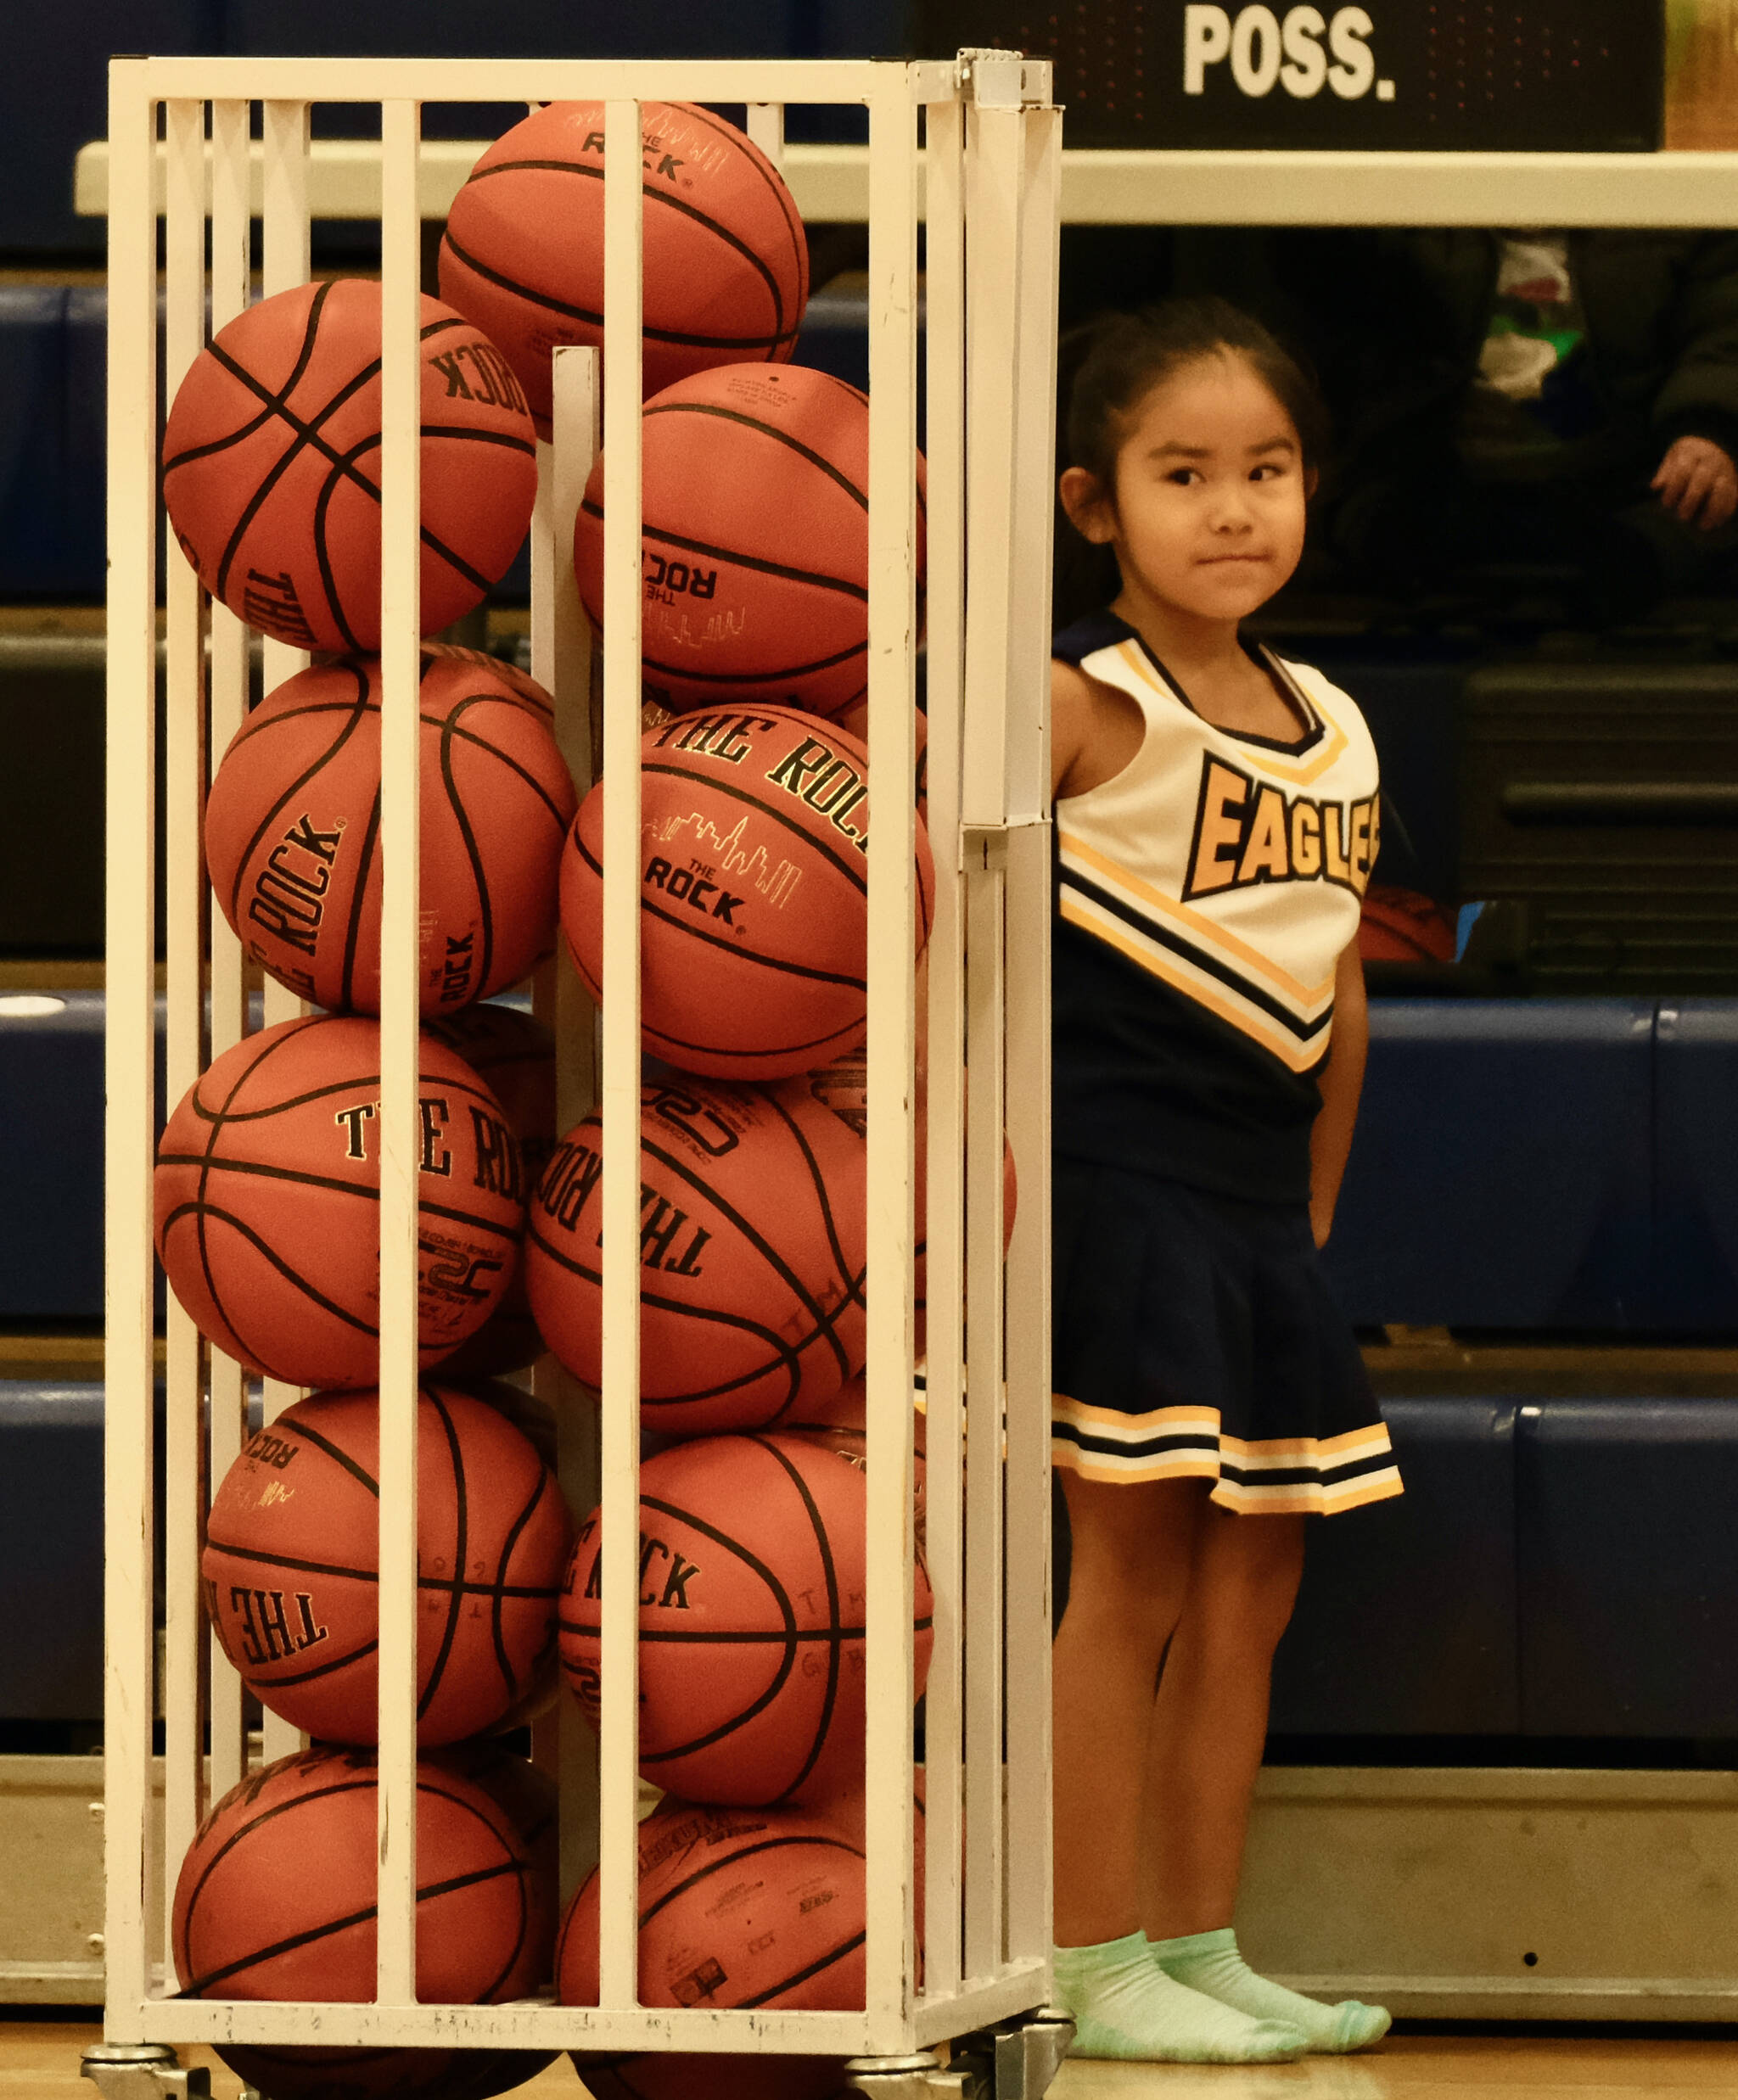 Angoon fan, and cheerleader, Blake Herrera Johnson, 5, awaits the start of the Eagles game against the Dillingham Wolverines during the Elizabeth Peratrovich Women’s High School Basketball Invitational Tournament on Thursday at Thunder Mountain High School. The tournament runs through Saturday. (Klas Stolpe / For the Juneau Empire)